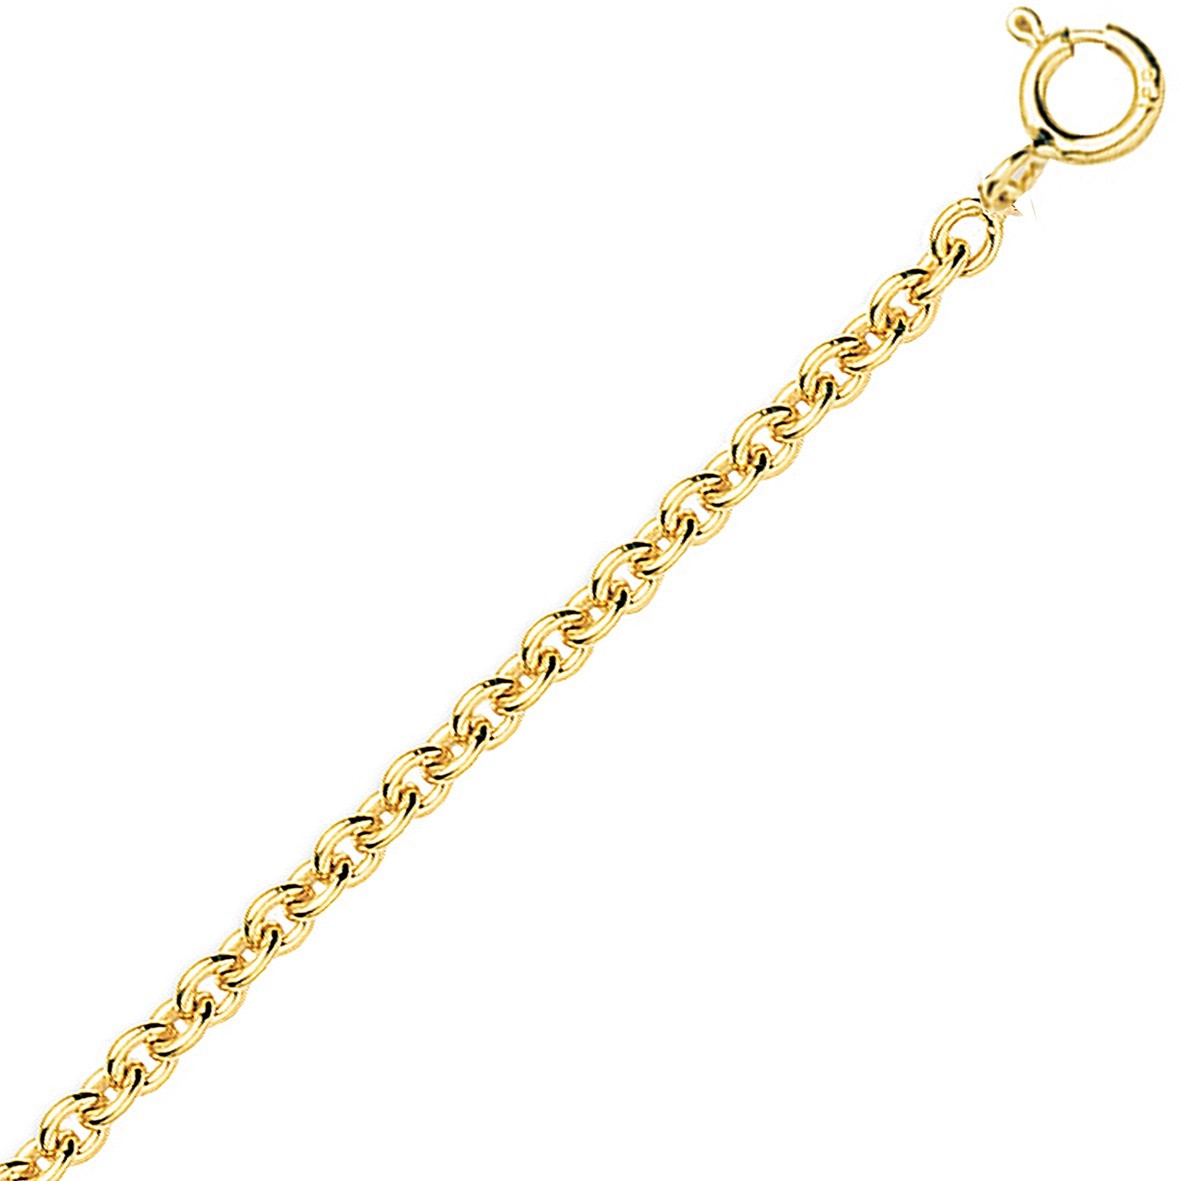 Chaine or jaune 18k maille forçat ronde 1,10mm